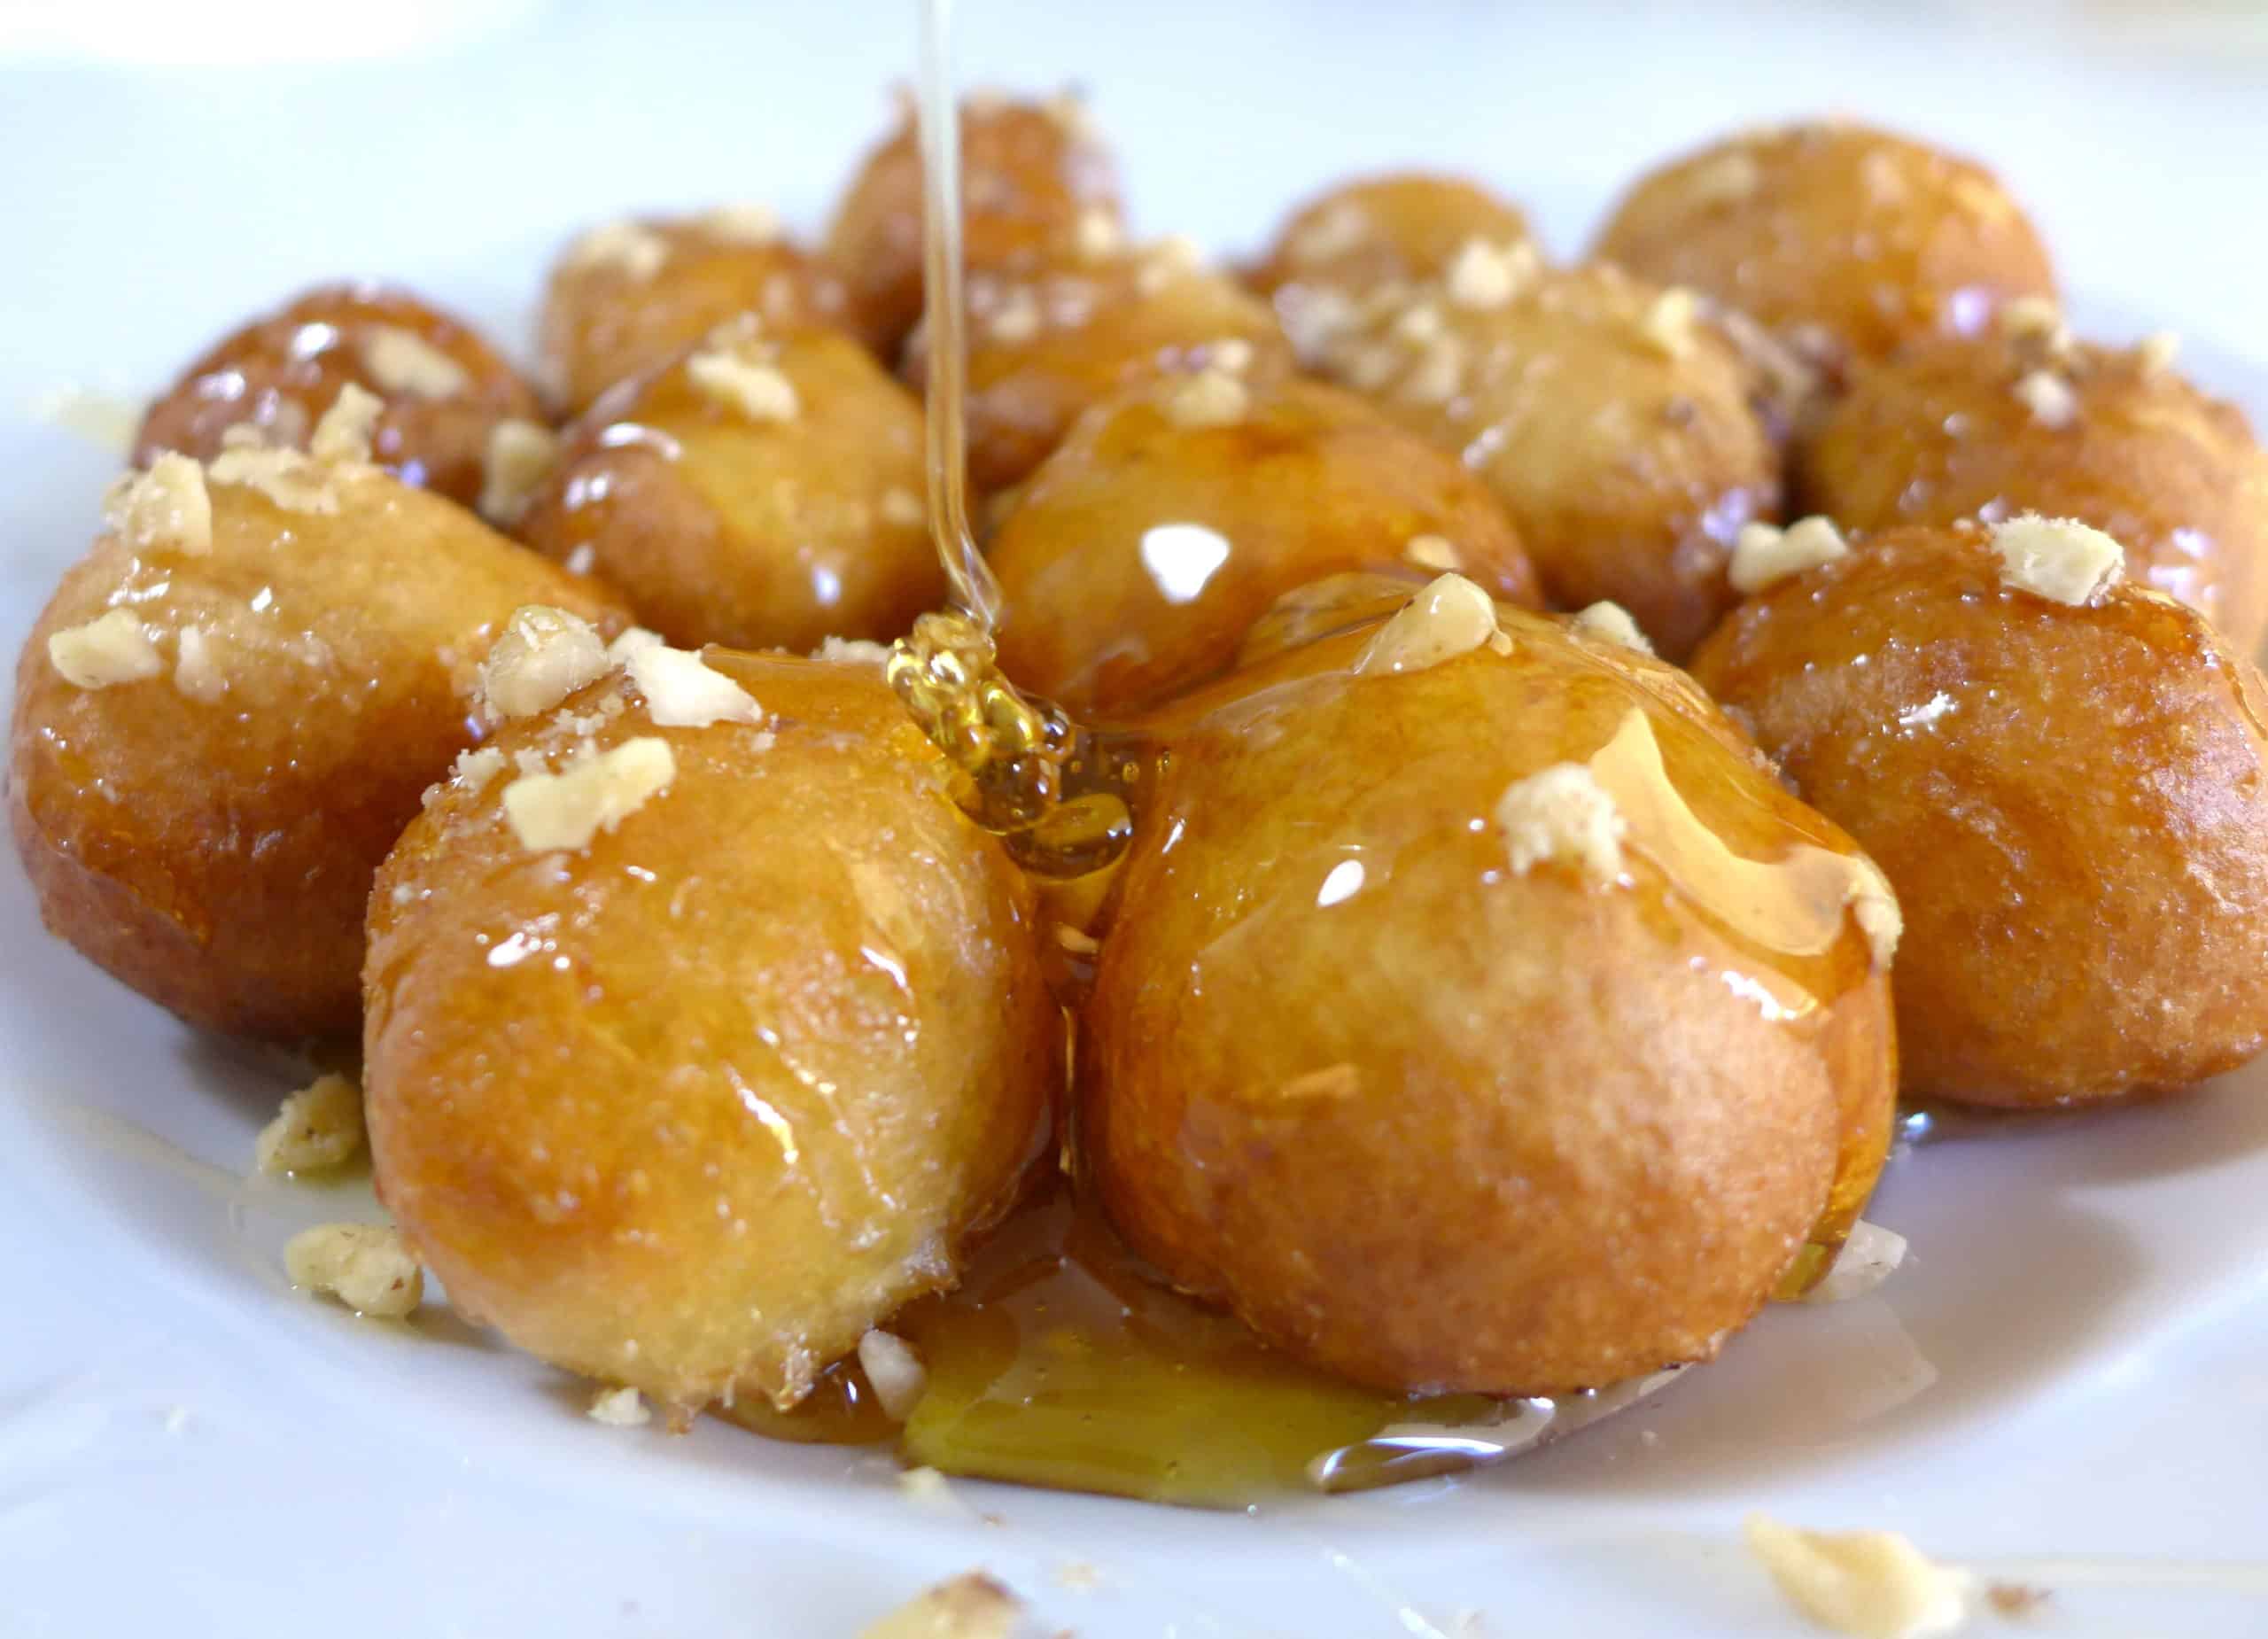 Greek donuts (Loukoumades) drizzled with honey and walnuts